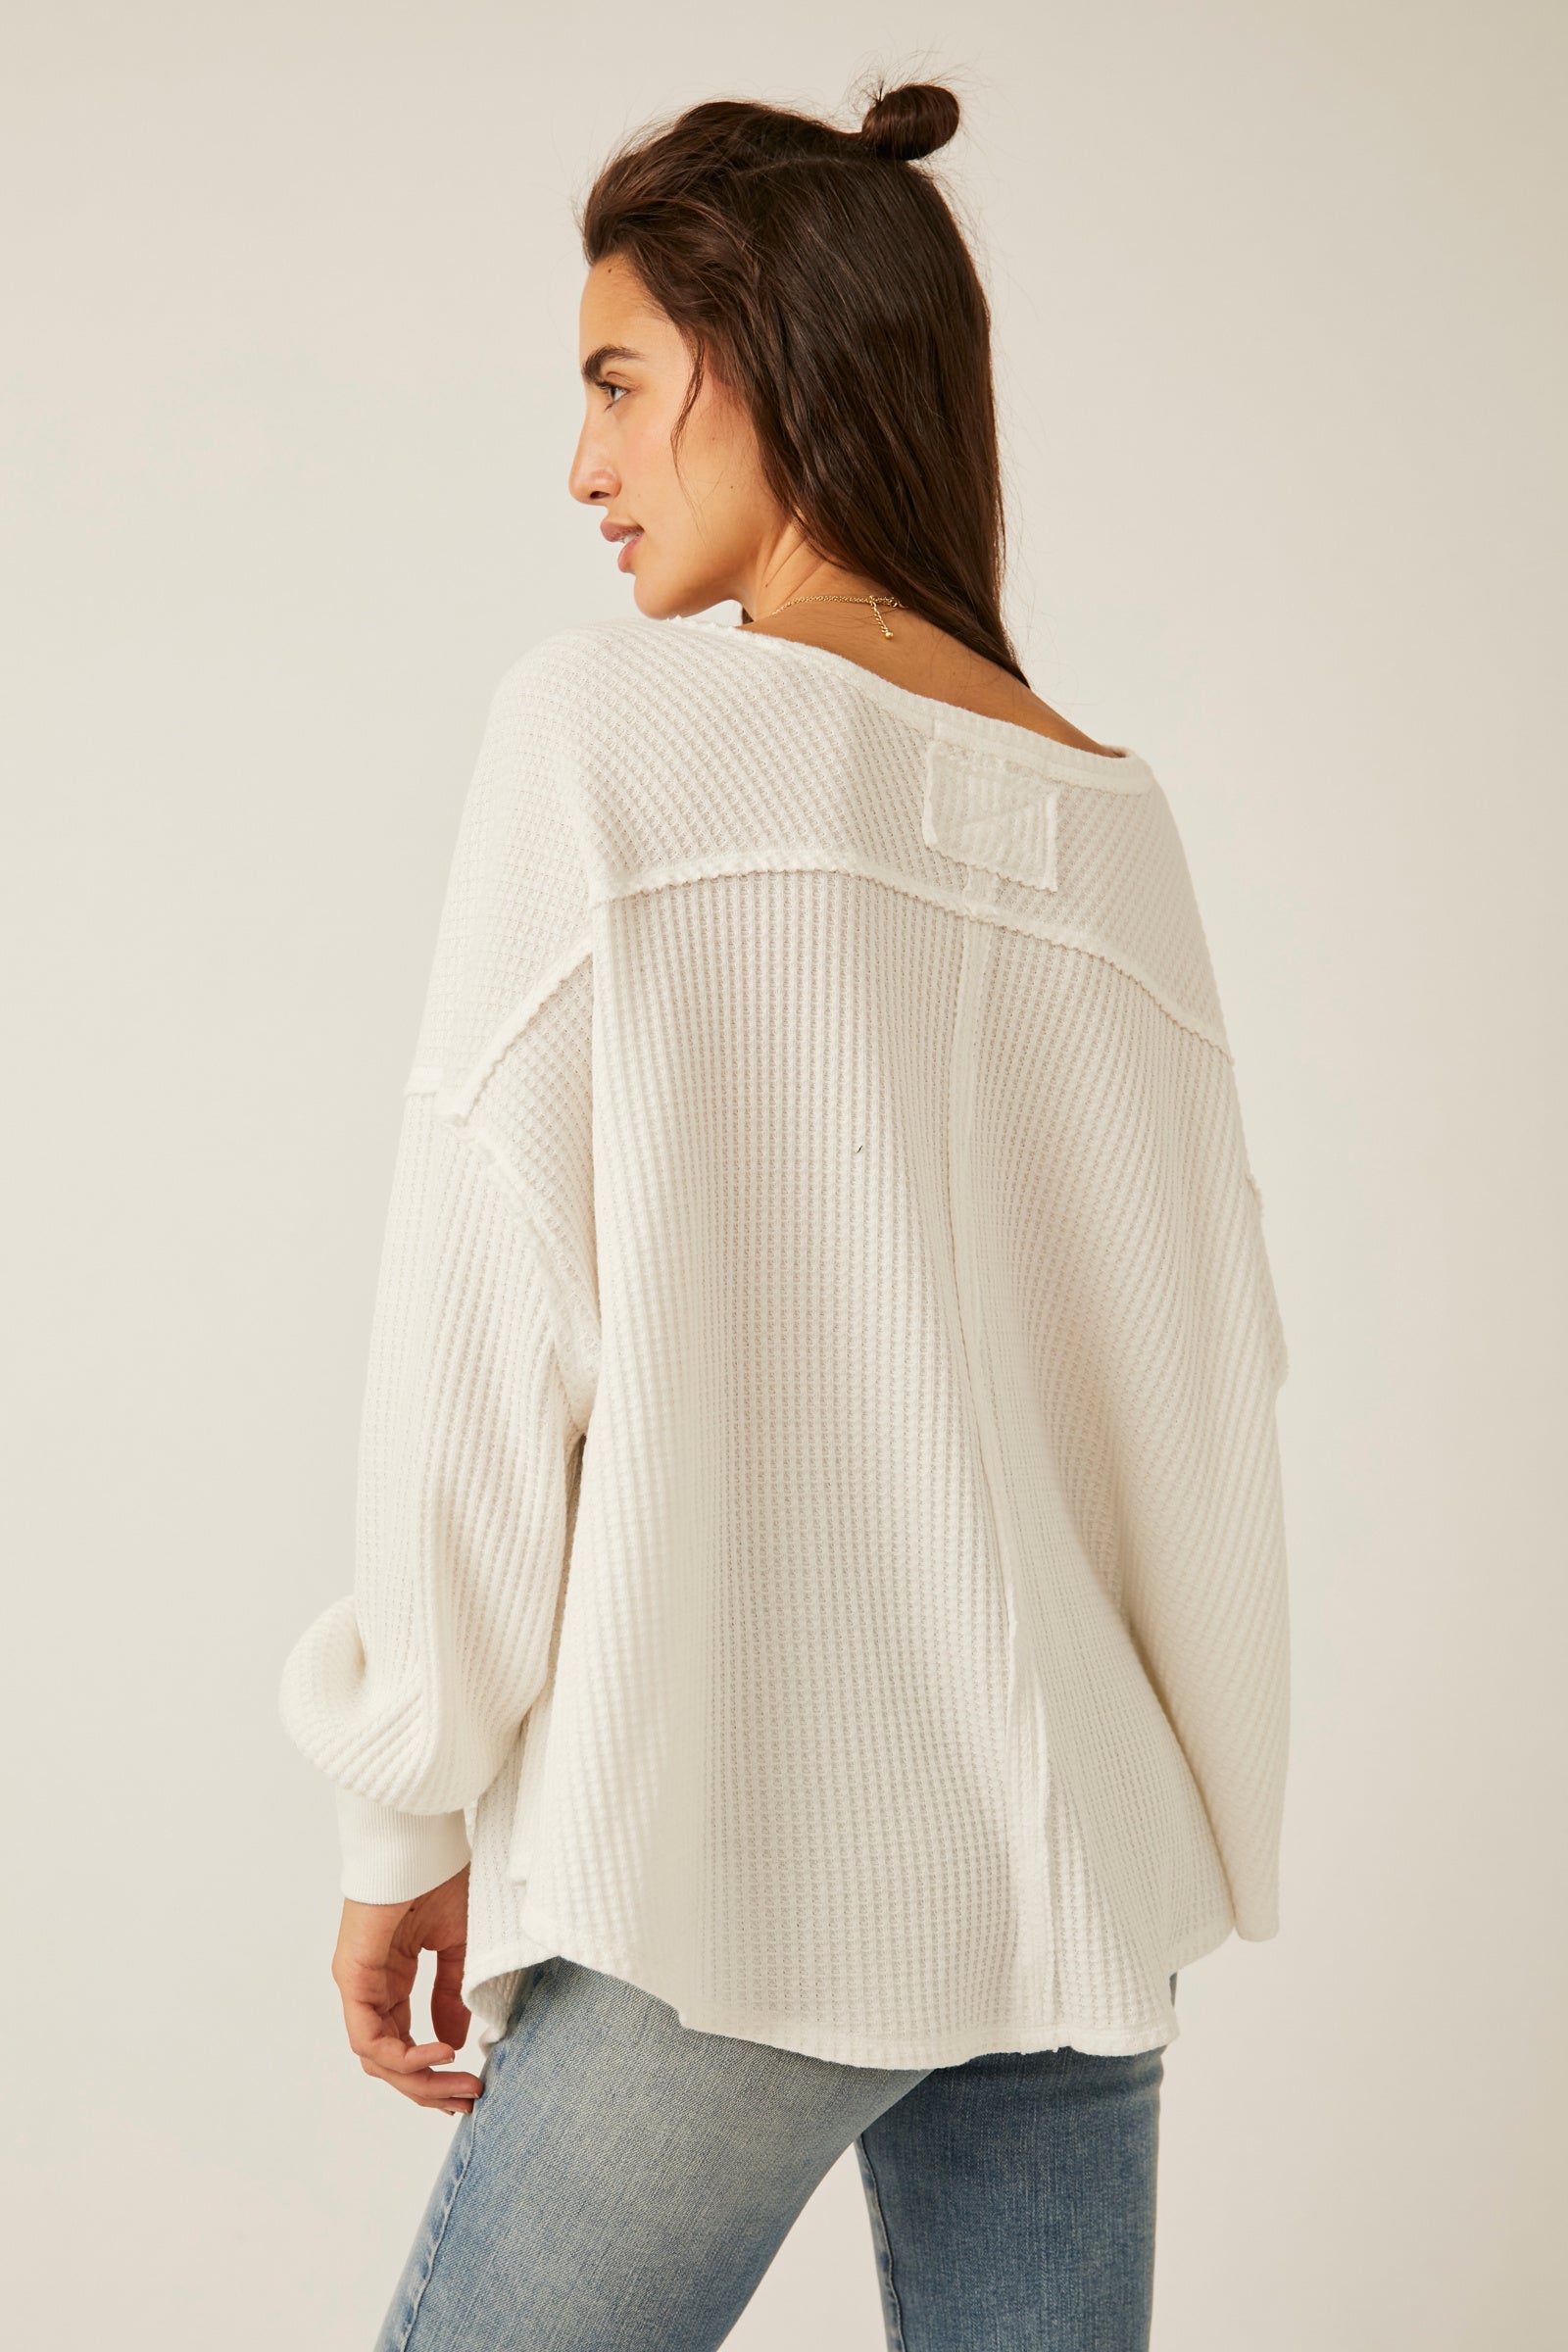 FREE PEOPLE CORALINE THERMAL IN IVORY